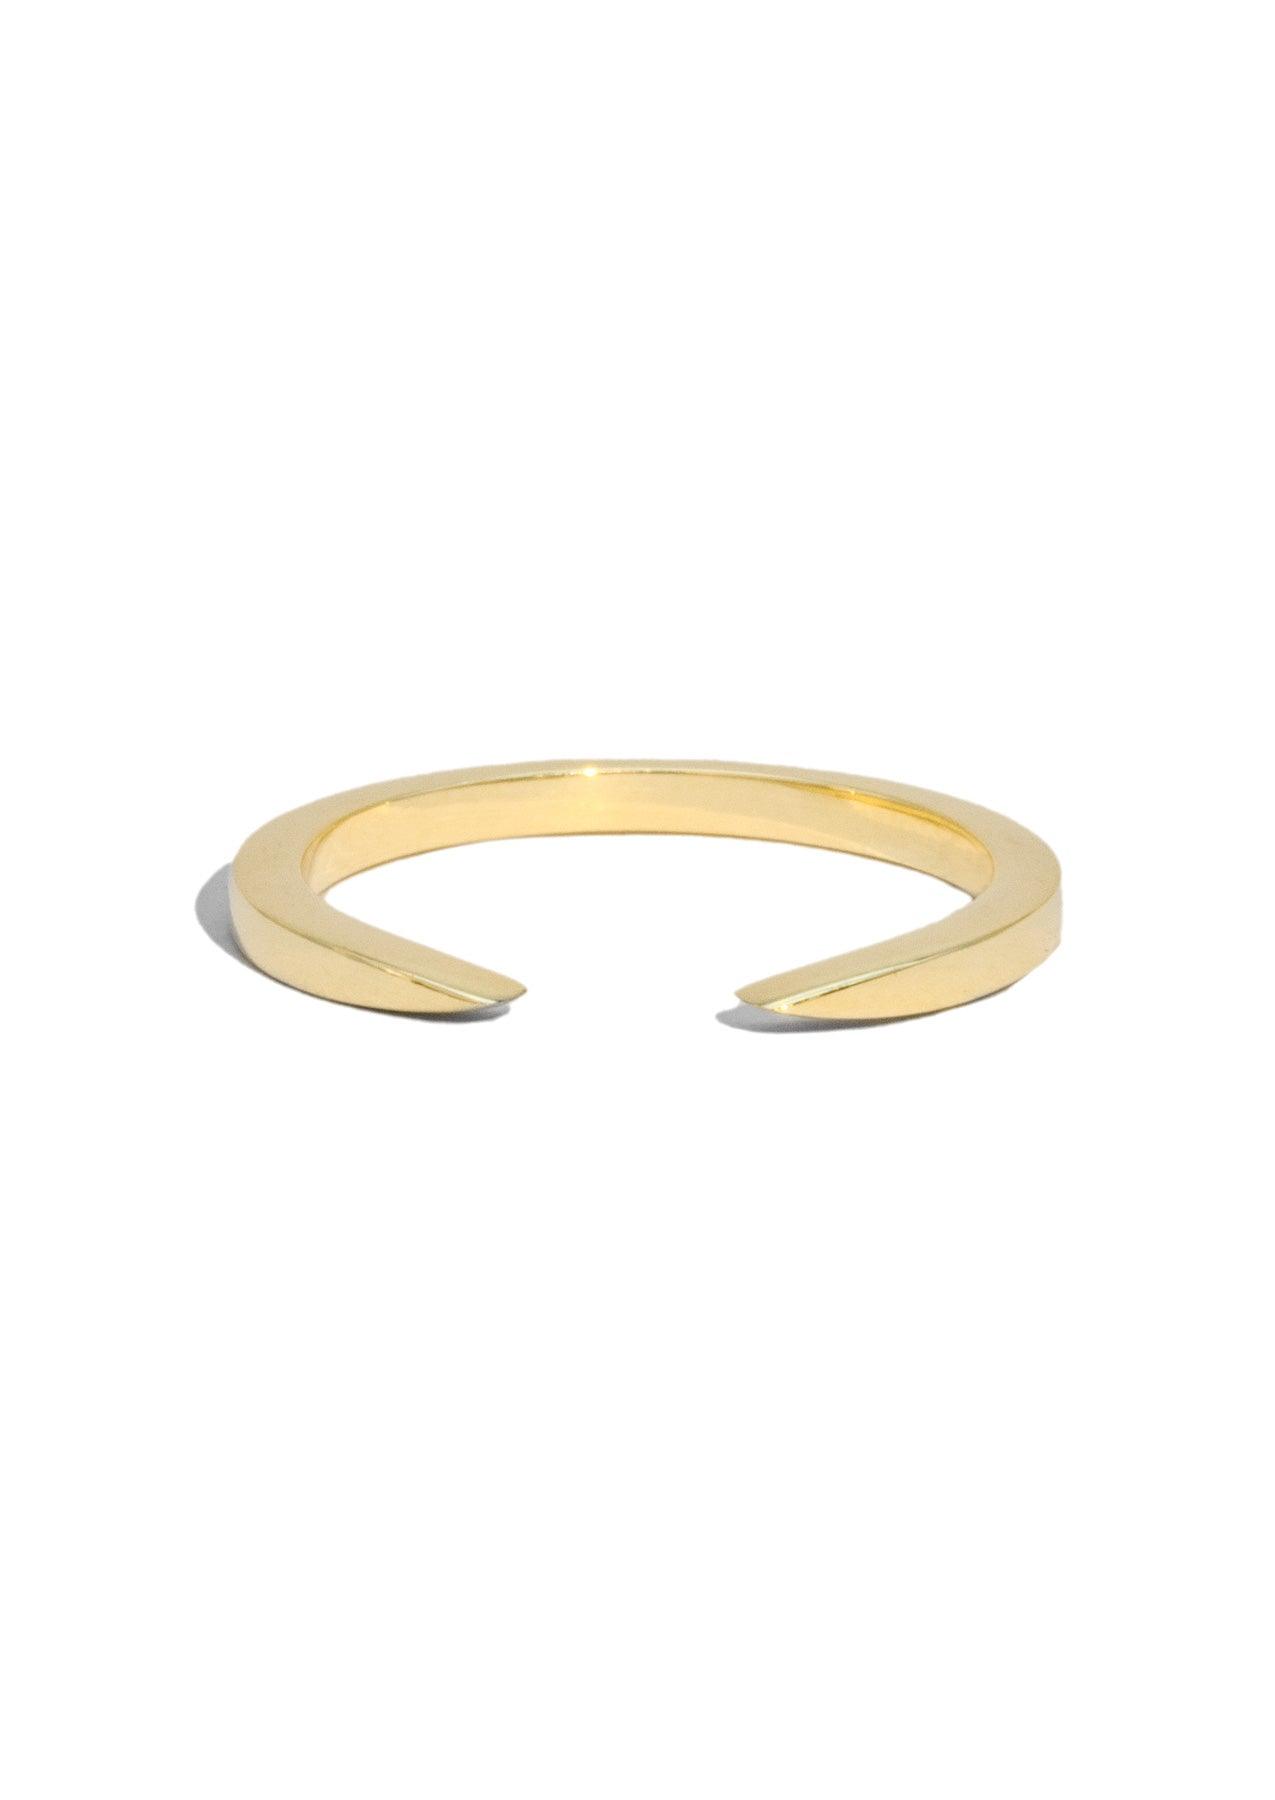 The Open Wedding Band Yellow Gold